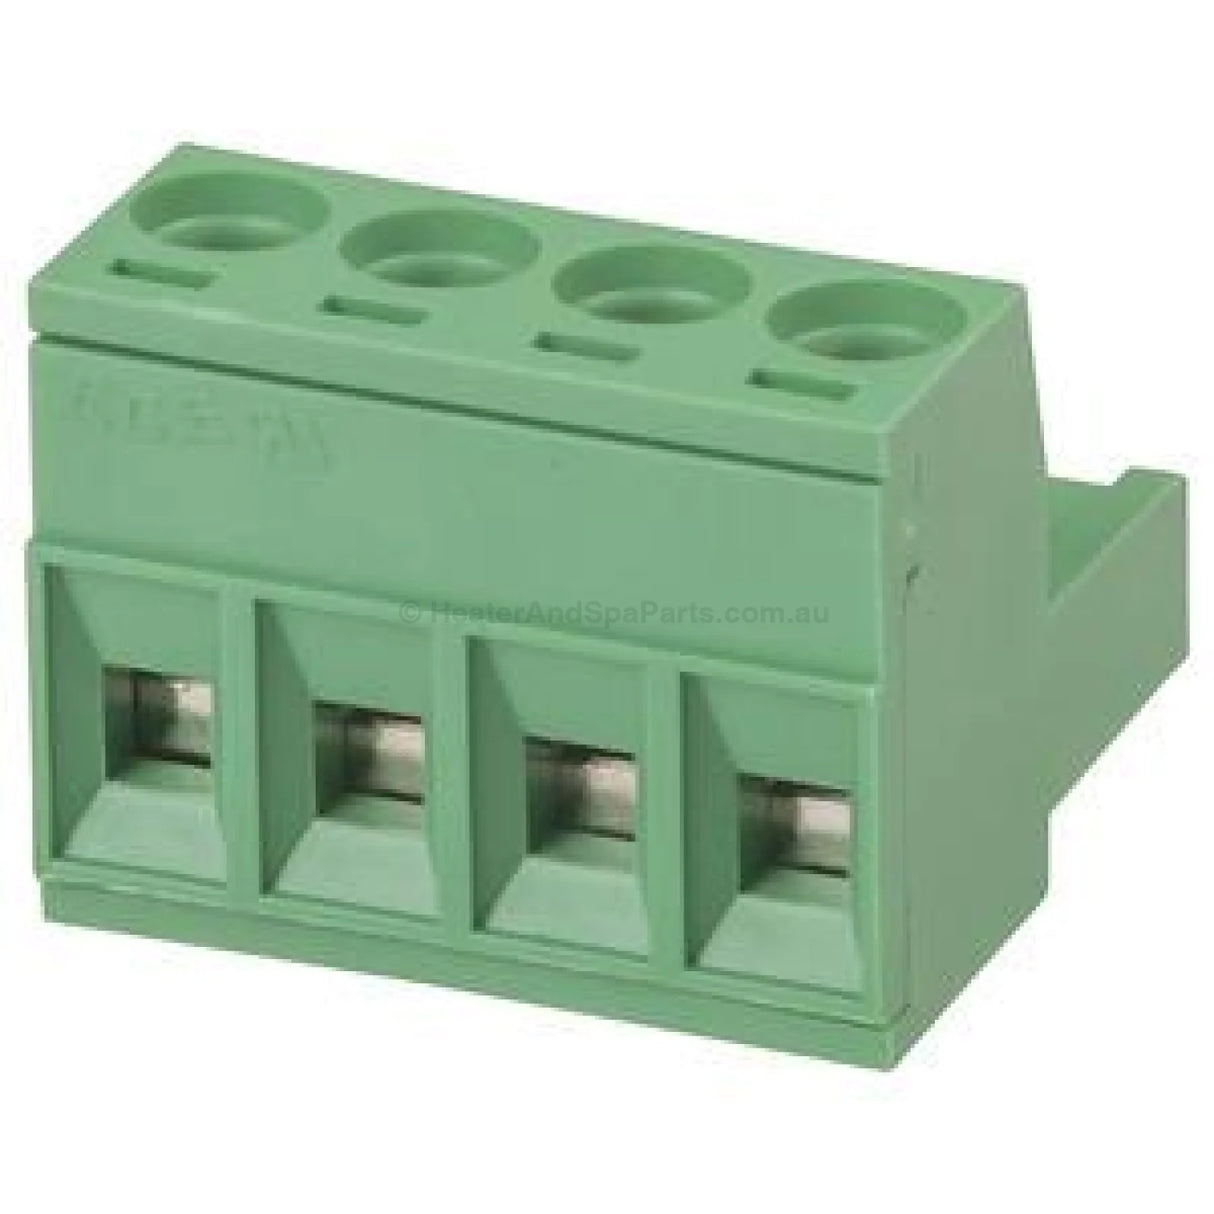 4-Wire Green Plug - Heater and Spa Parts